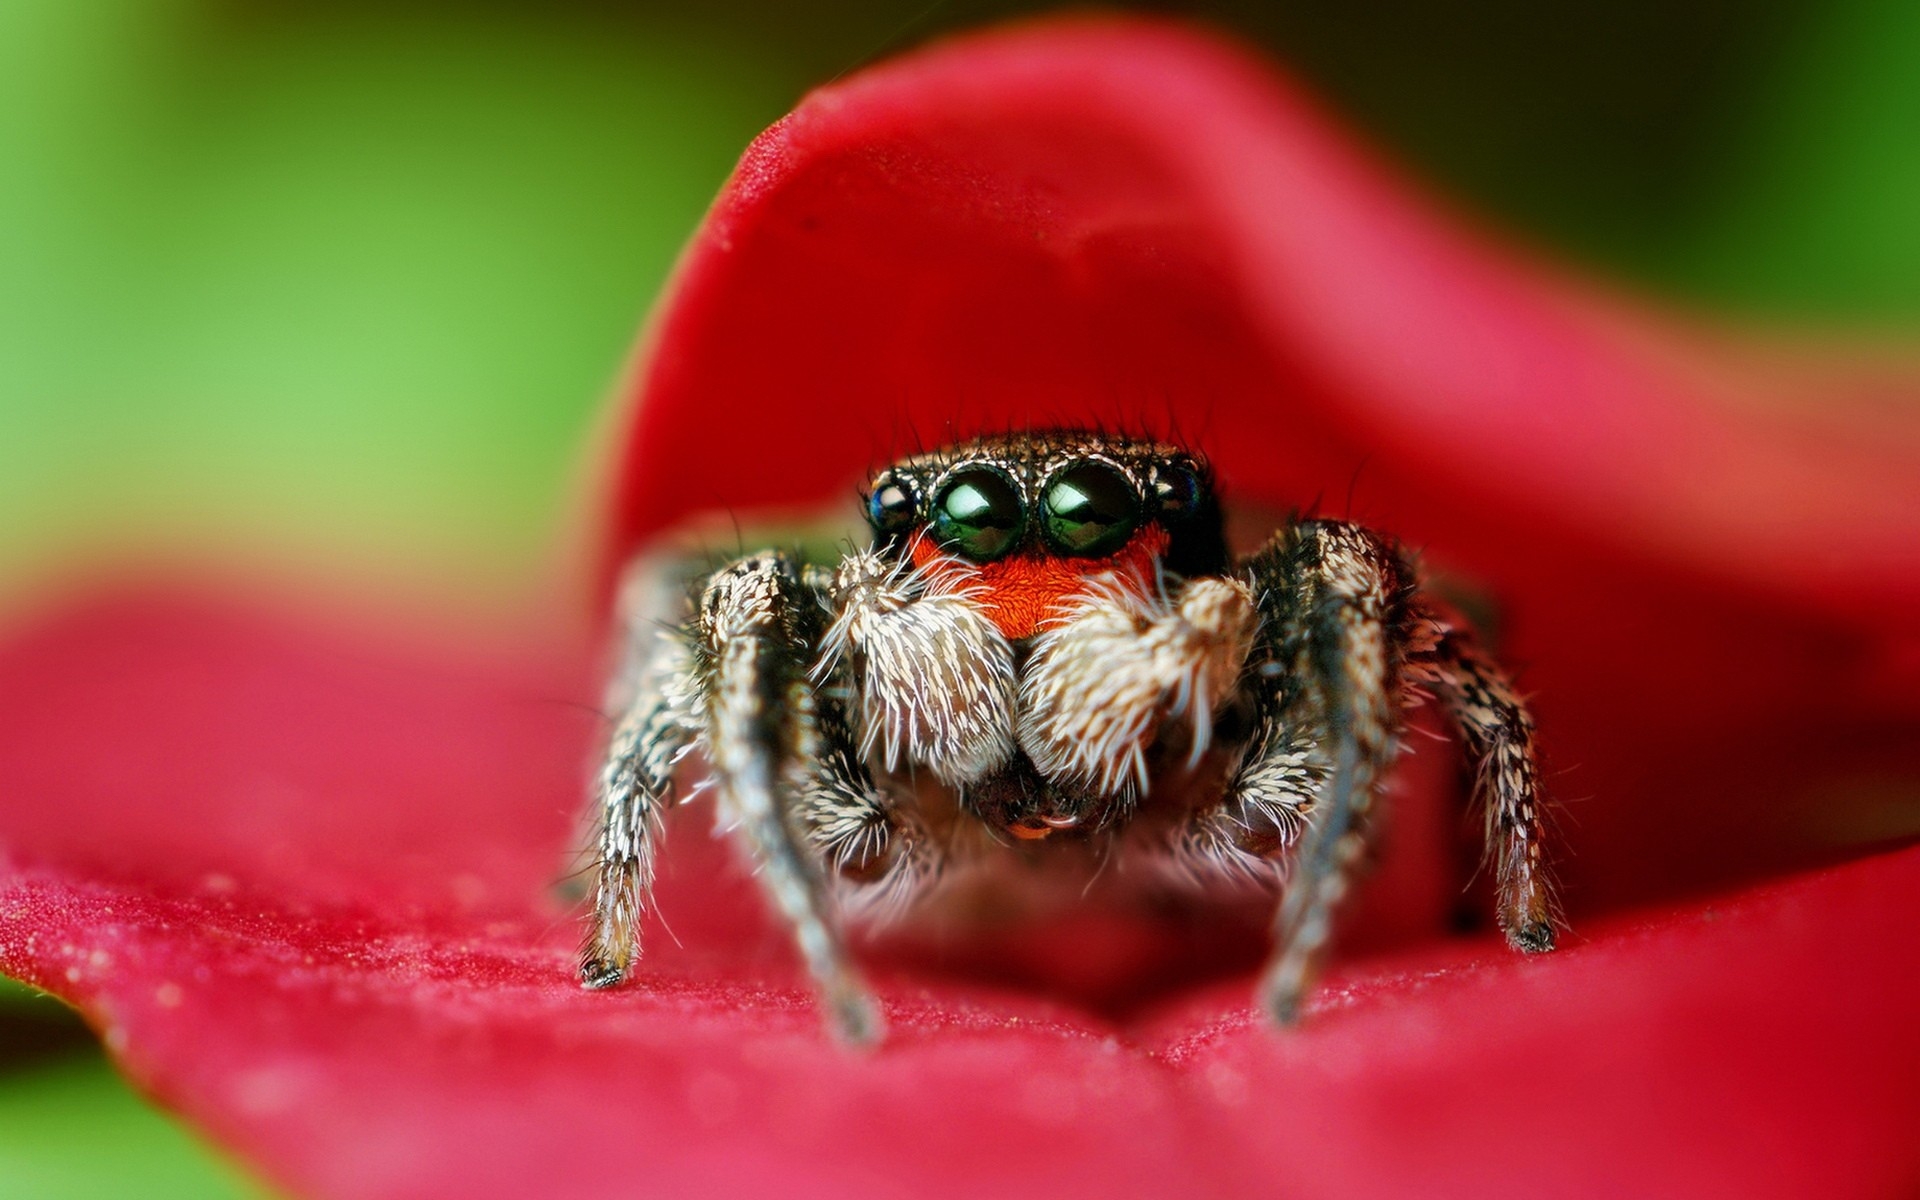 spiders jumping spider 1920x1200 wallpaper High Quality Wallpaper, High Definition Wallpaper